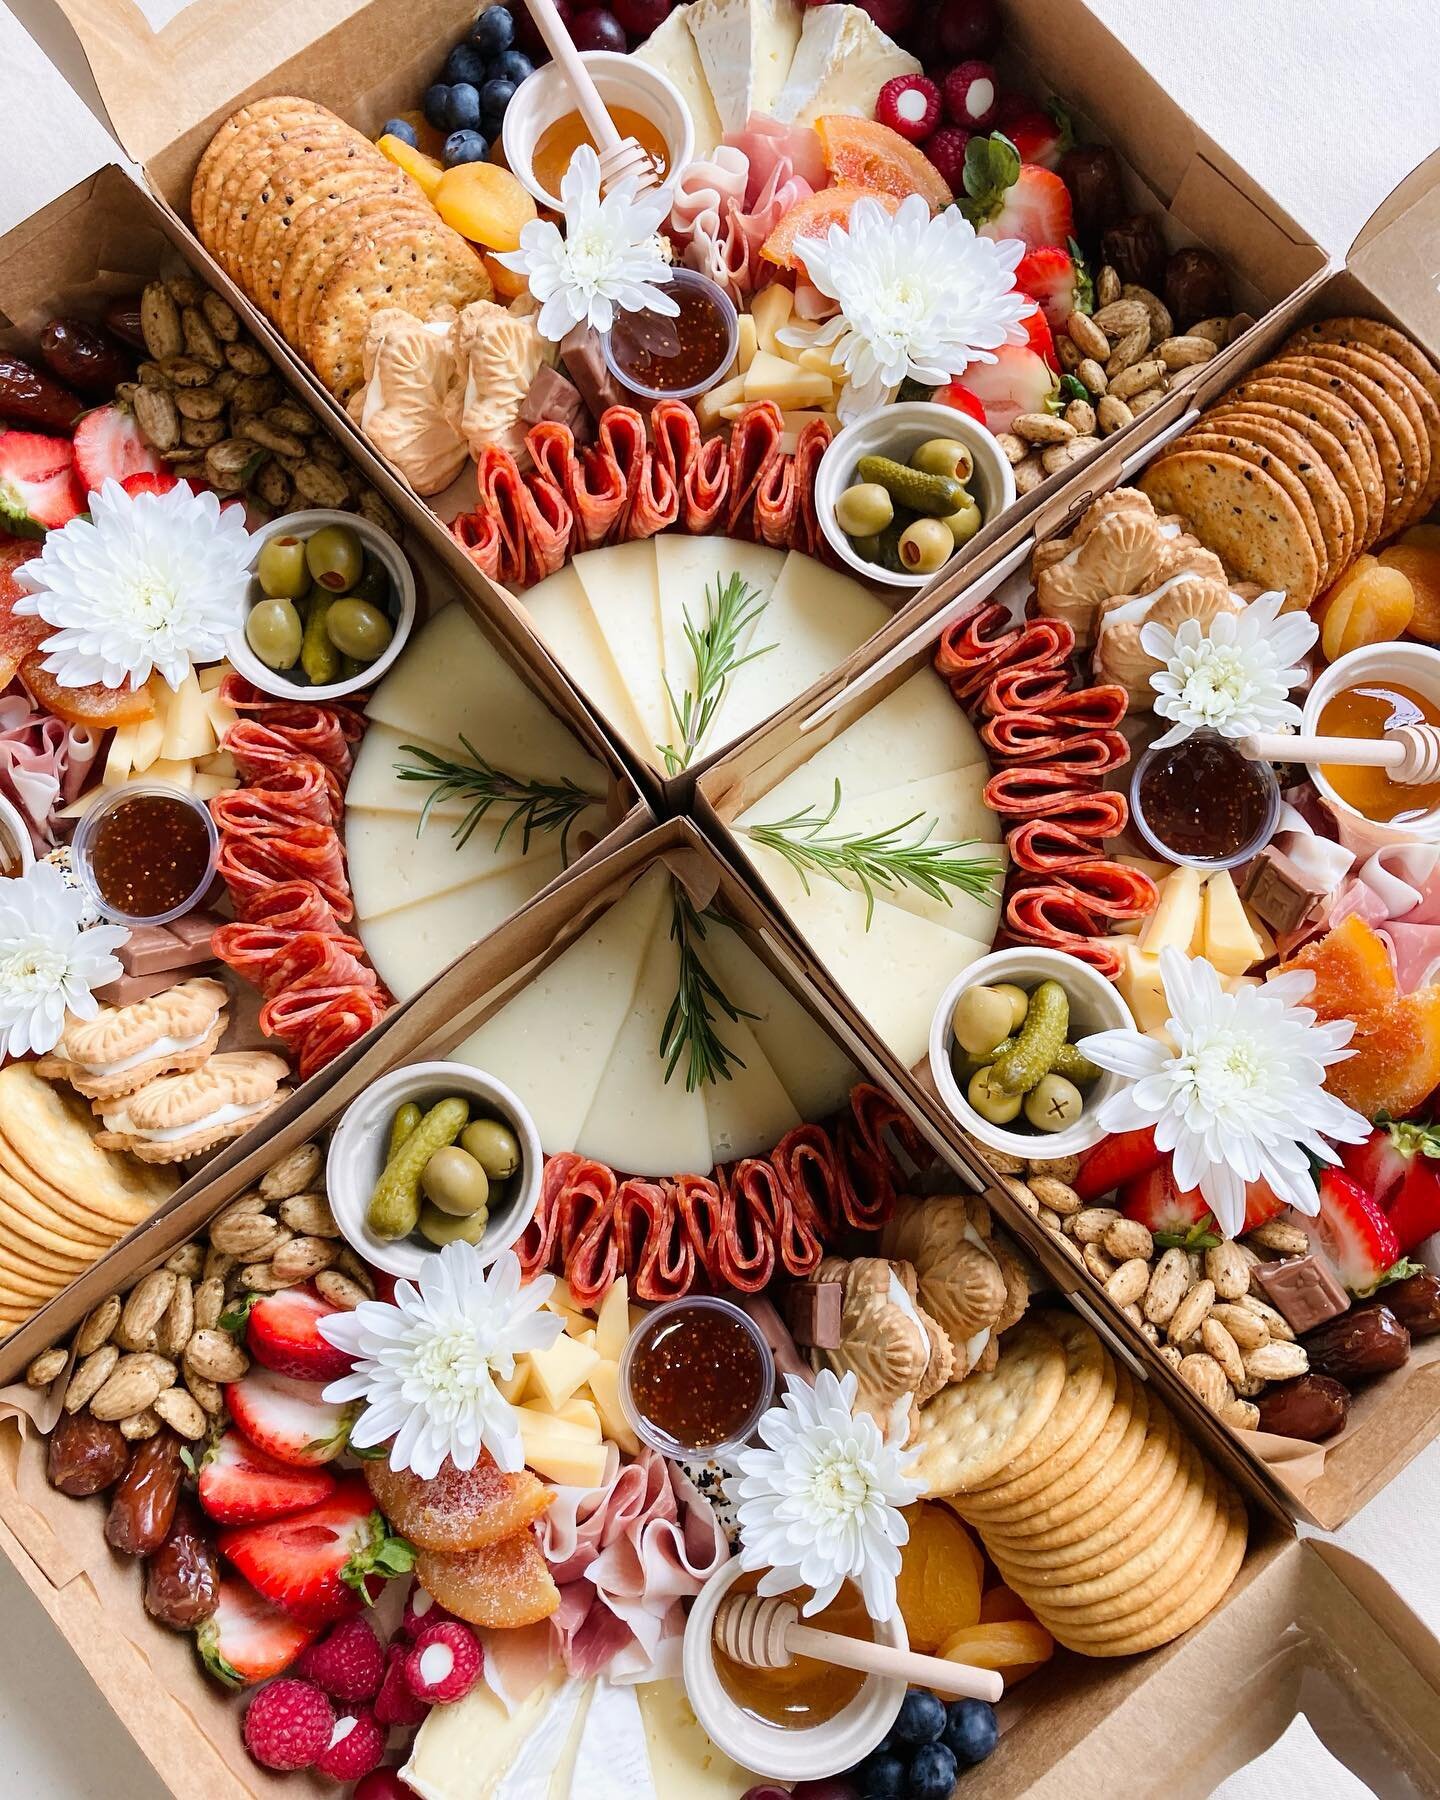 Our original krafted boxes always create a cool looking charcuterie kaleidoscope! Enjoy the weekend! 
.
.
.
.
.
.
.
.
.
.
.
.
#kalediscope #cheeseart #tasty #tastemade #taste #eat #foodie #foodblogger #picnicproposal #picoftheday #eyecandy #oc #irvin